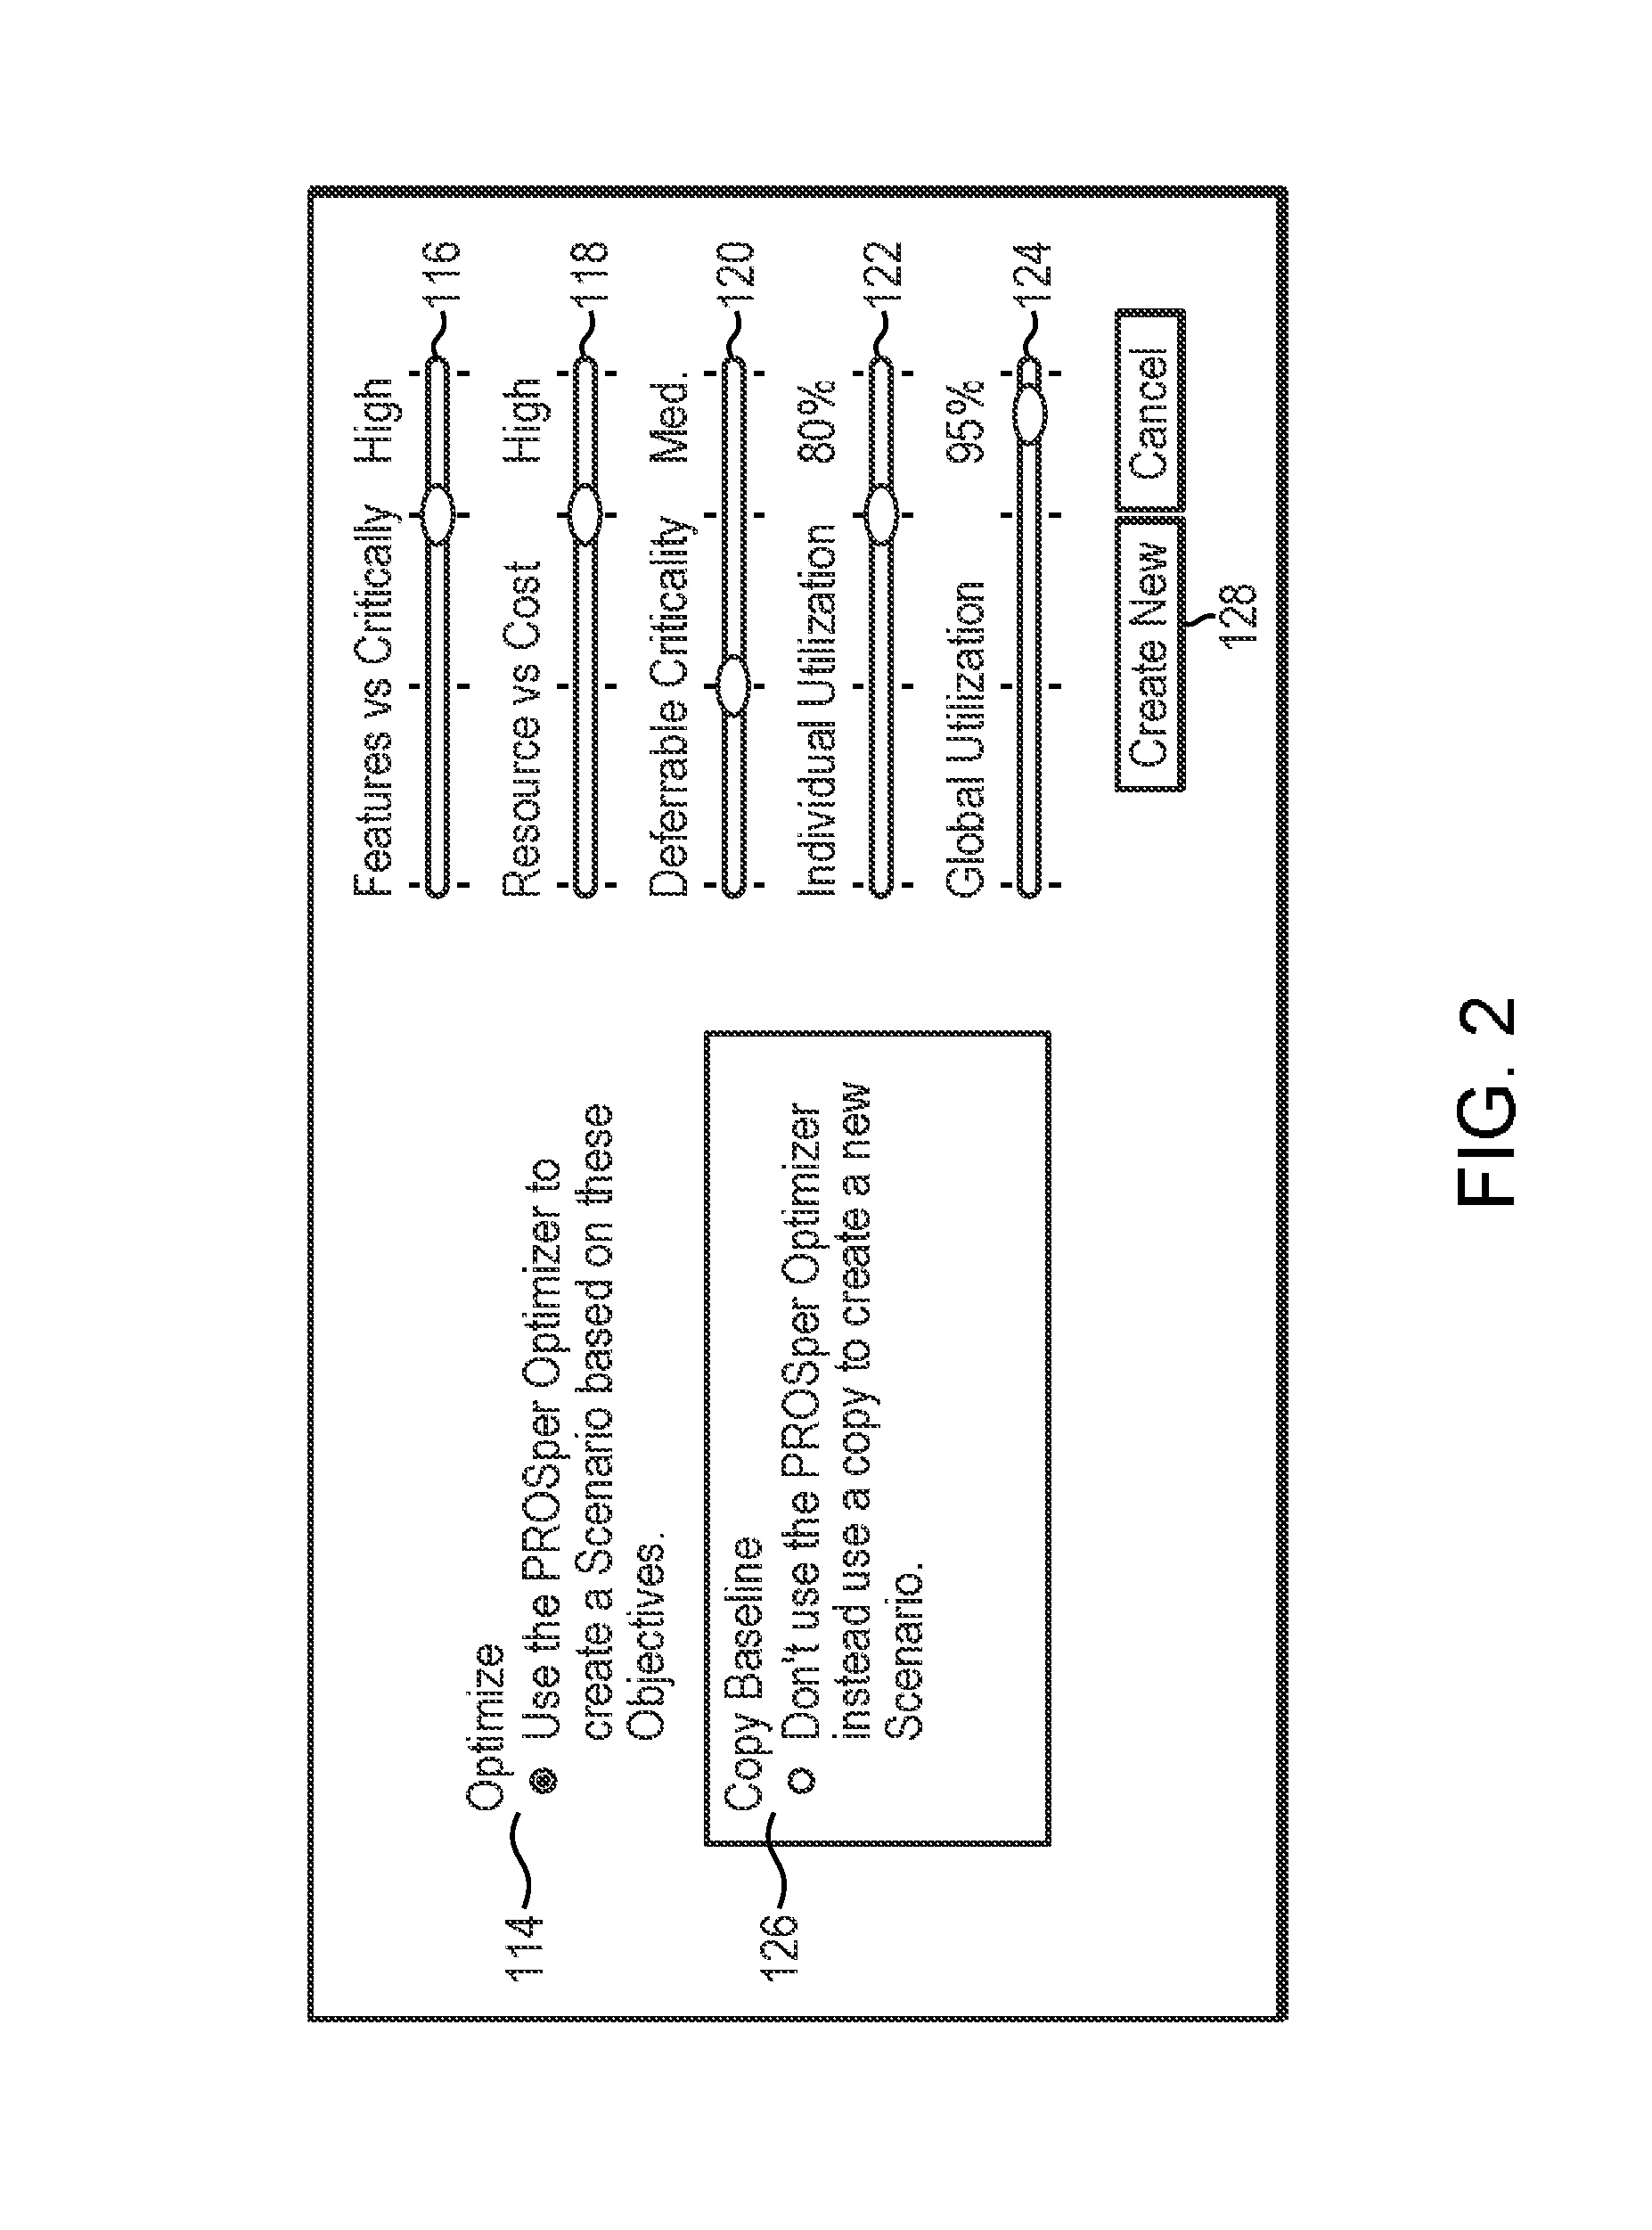 Method and system for allocation of resources in an Agile environment